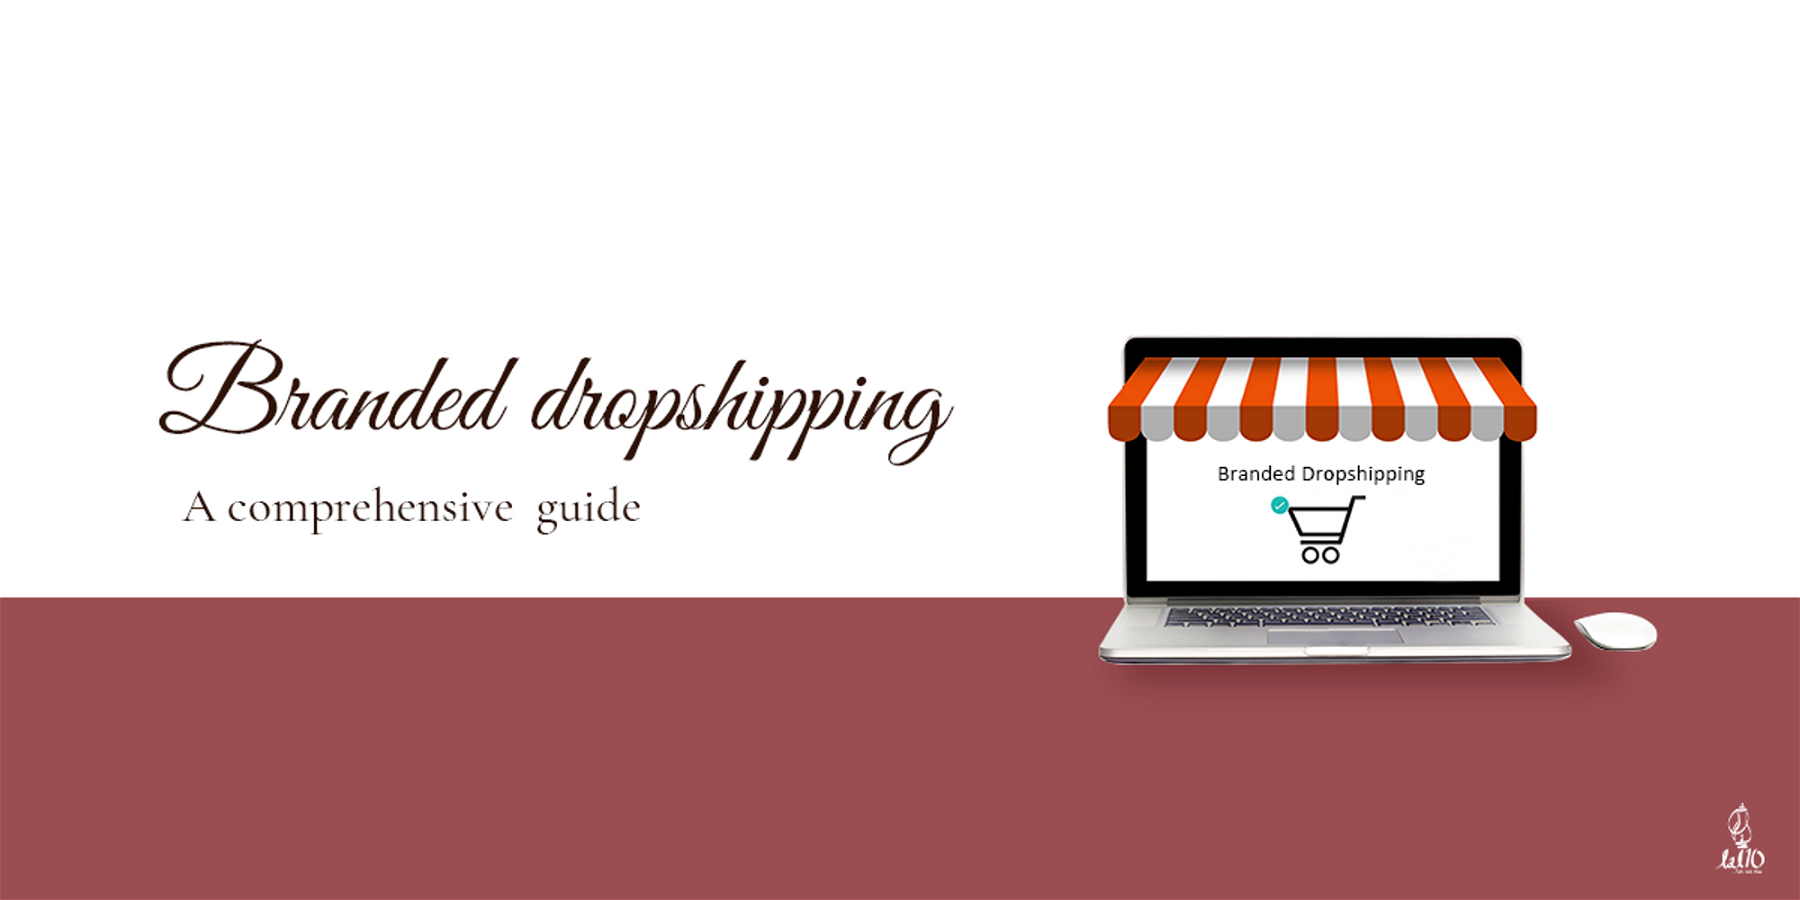 Branded dropshipping : A comprehensive guide